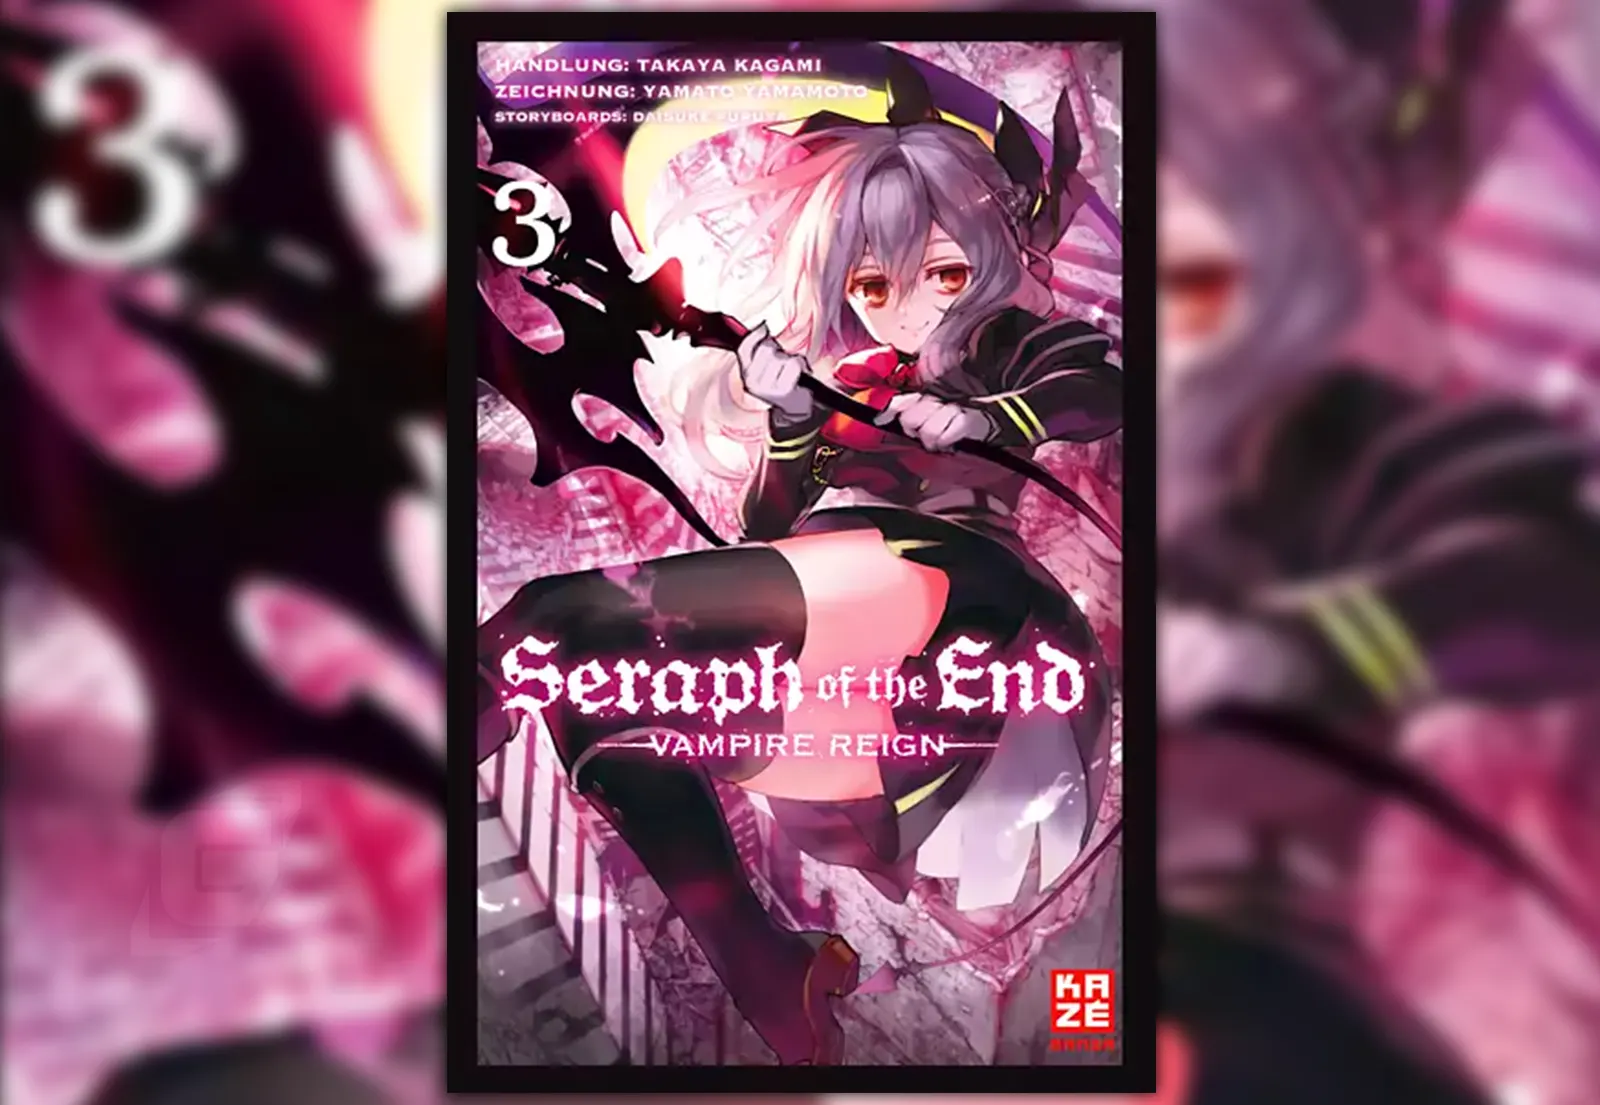 Unsere Review zu Seraph of the End Band 3